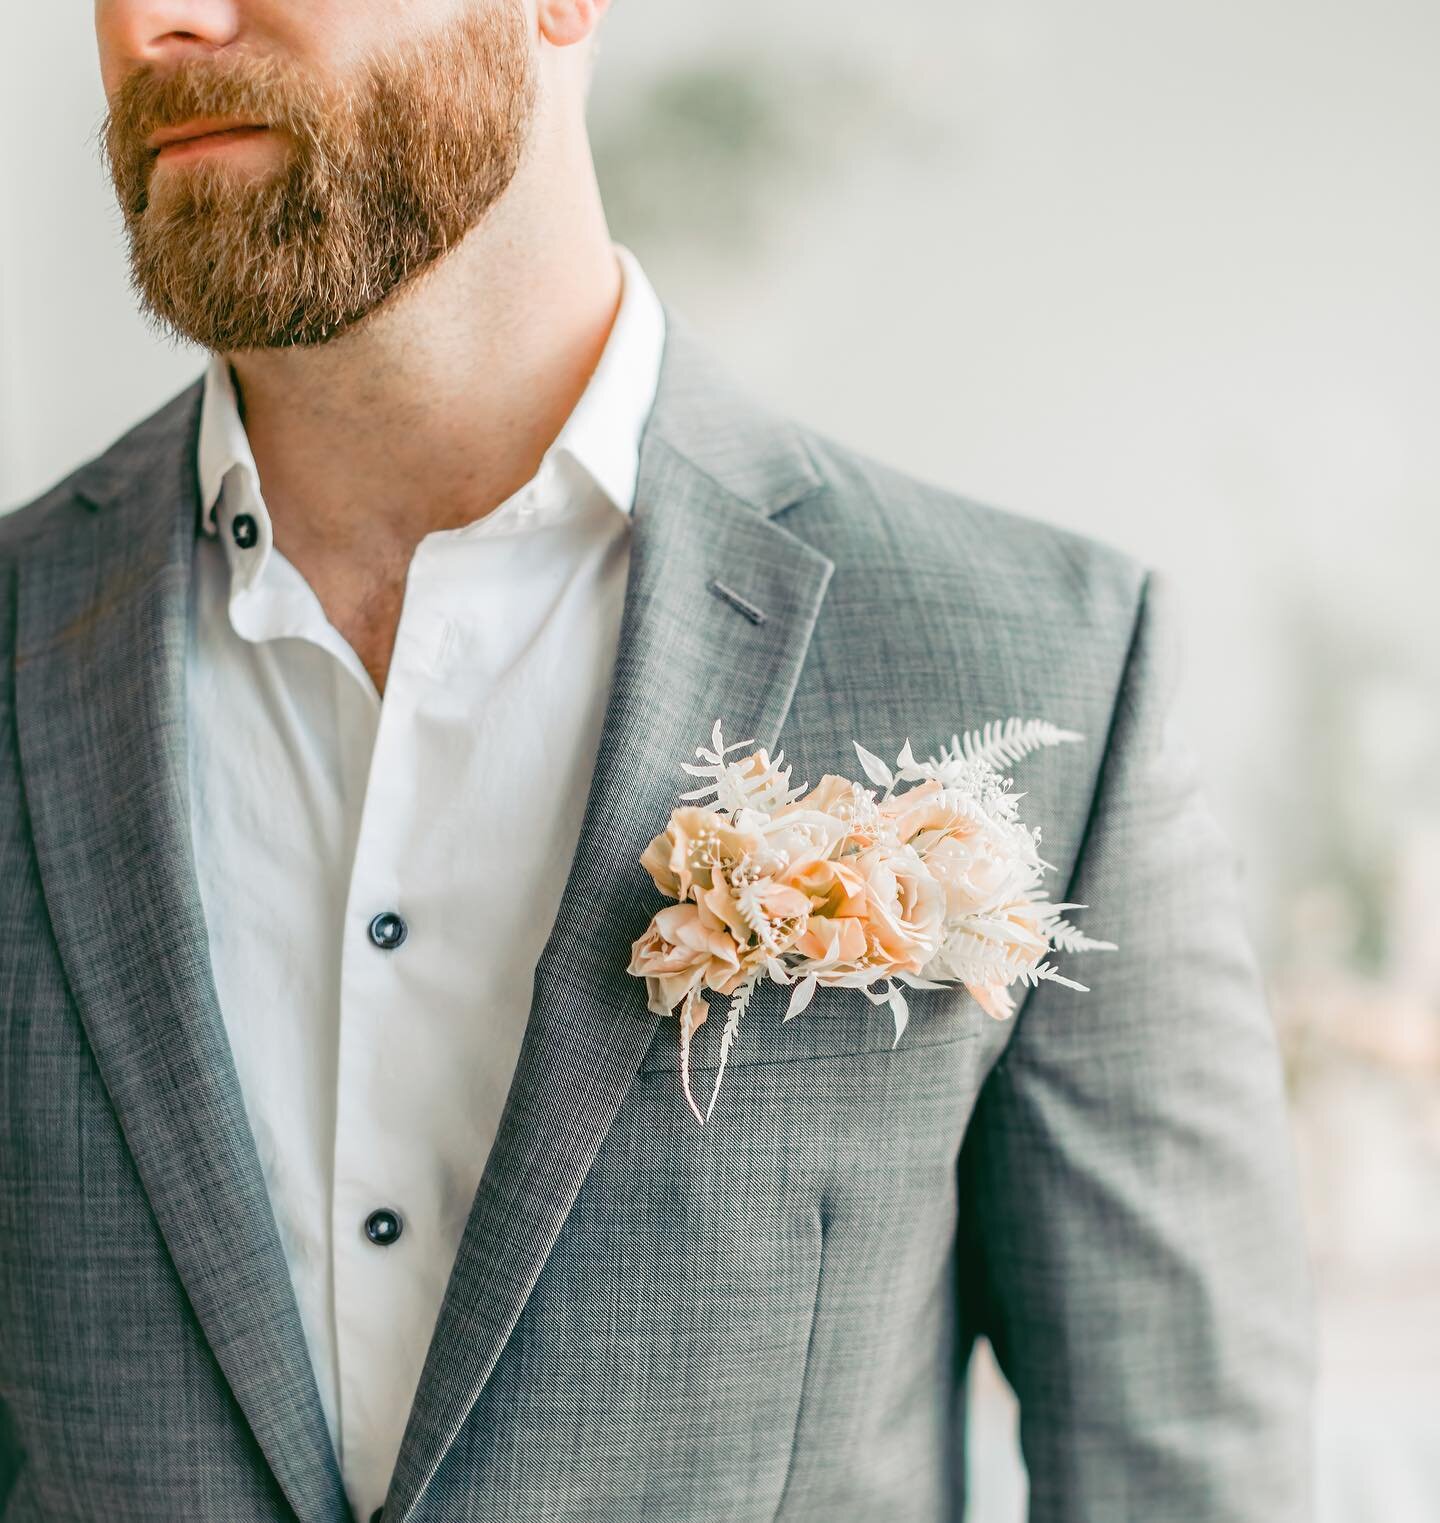 HAPPY WEDDING WEDNESDAY! 🥳 I&rsquo;m a little obsessed with doing a floral pocket square instead of a traditional boutonni&egrave;re!🤩 Double tap if you agree with me! 👏🏻

✨DREAM TEAM✨
Bar: Traveling Tin Co
Cake: Charity Fent Cake Design 
Decor: 